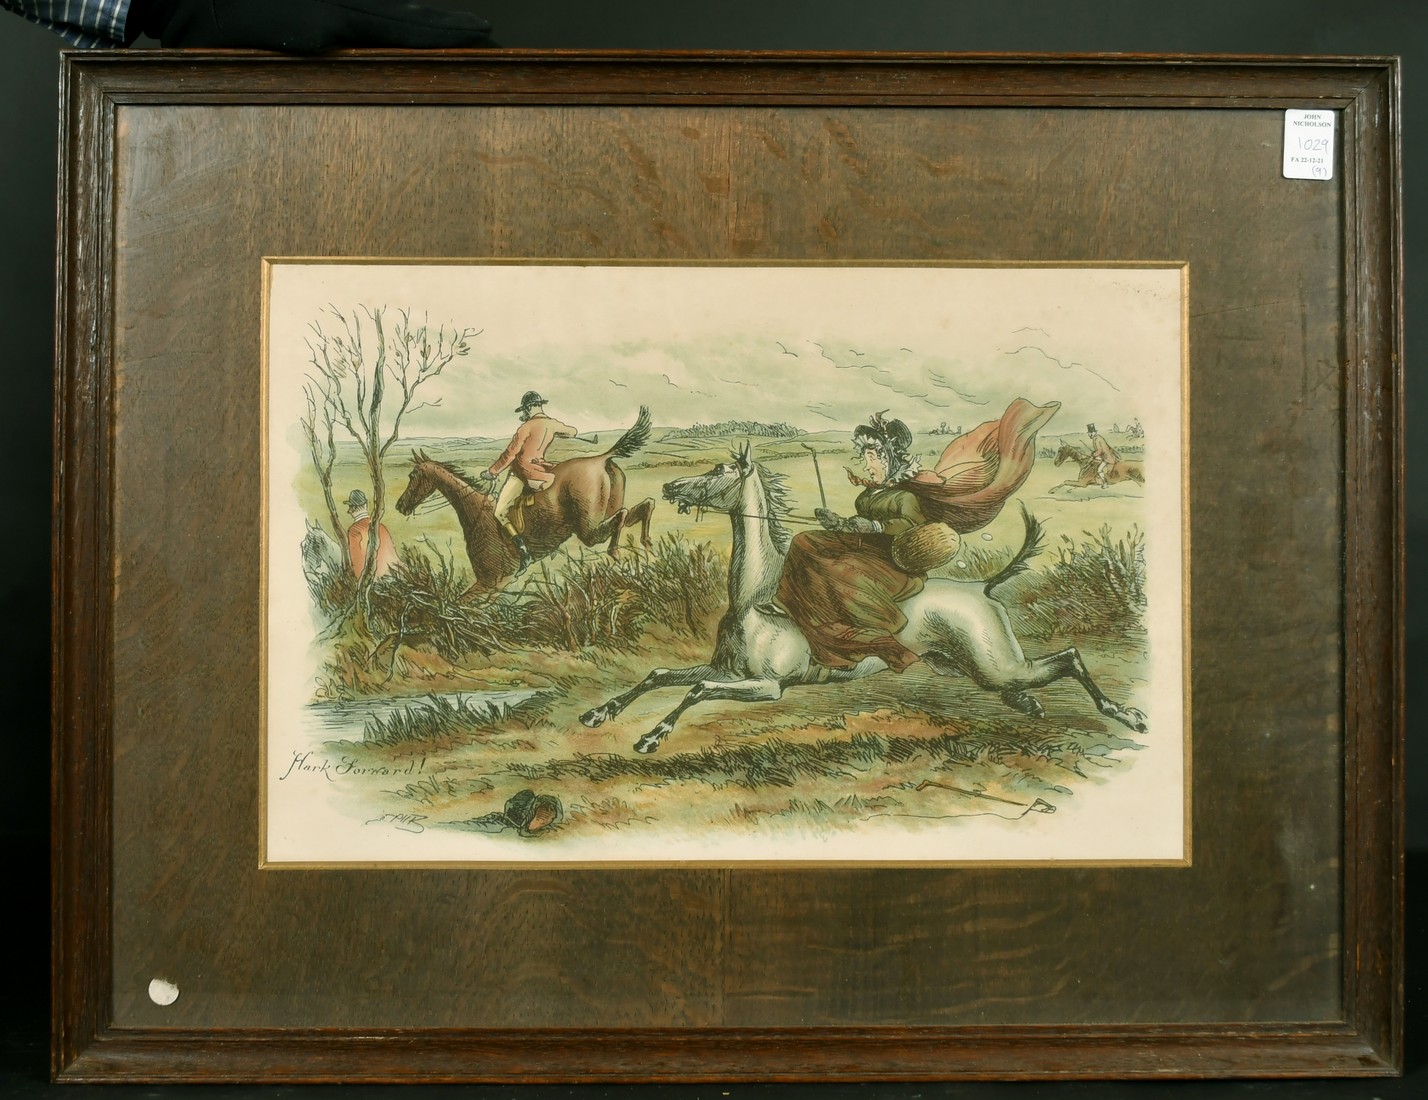 Hablot Knight Browne (1815-1882) 'Phiz', Dame Perkins and her Grey Mare, a set of 8 coloured prints, - Image 3 of 10